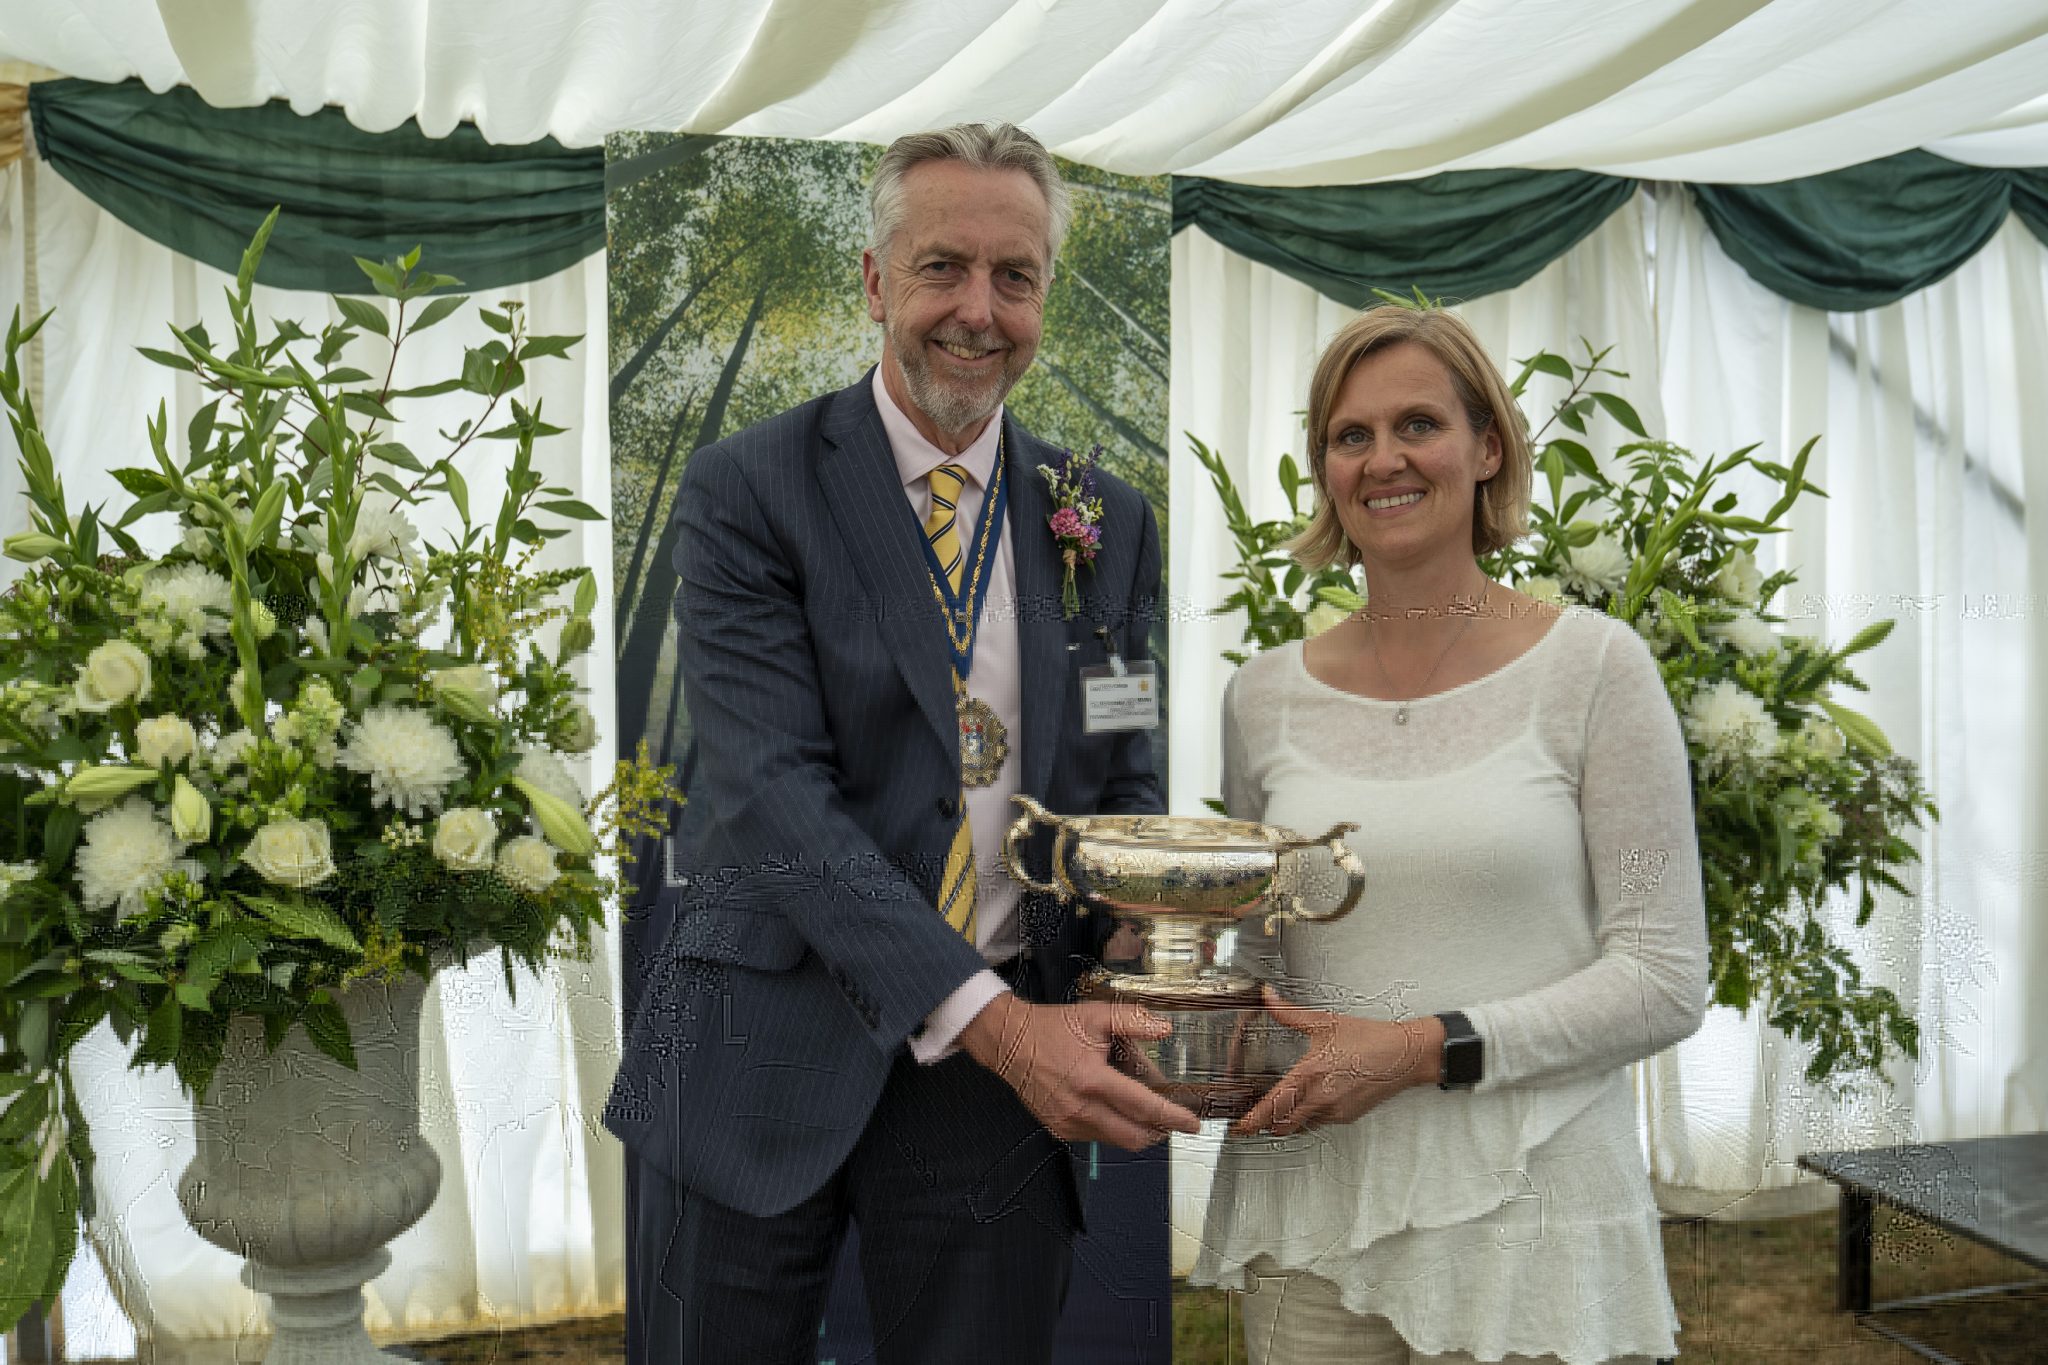 >REGINA MITCHELL RECEIVES SADDLERS TROPHY FOR EXCELLENCE IN SADDLERY